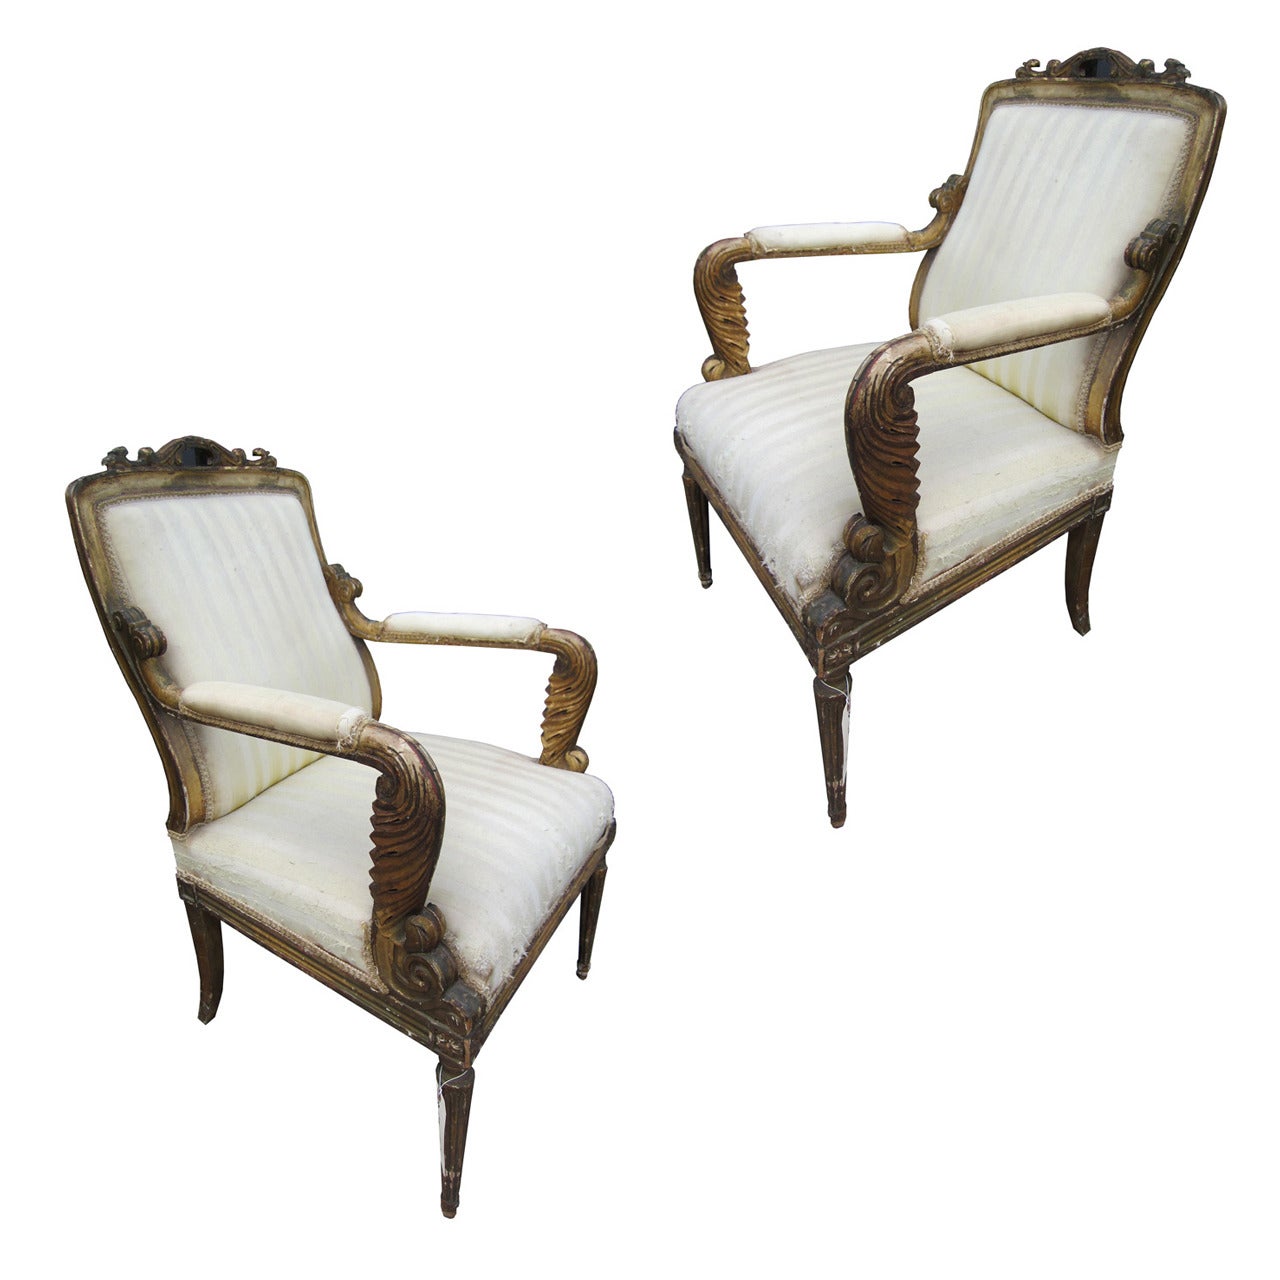 19th Century Pair of Carved Giltwood Armchairs, Probably Regency Period